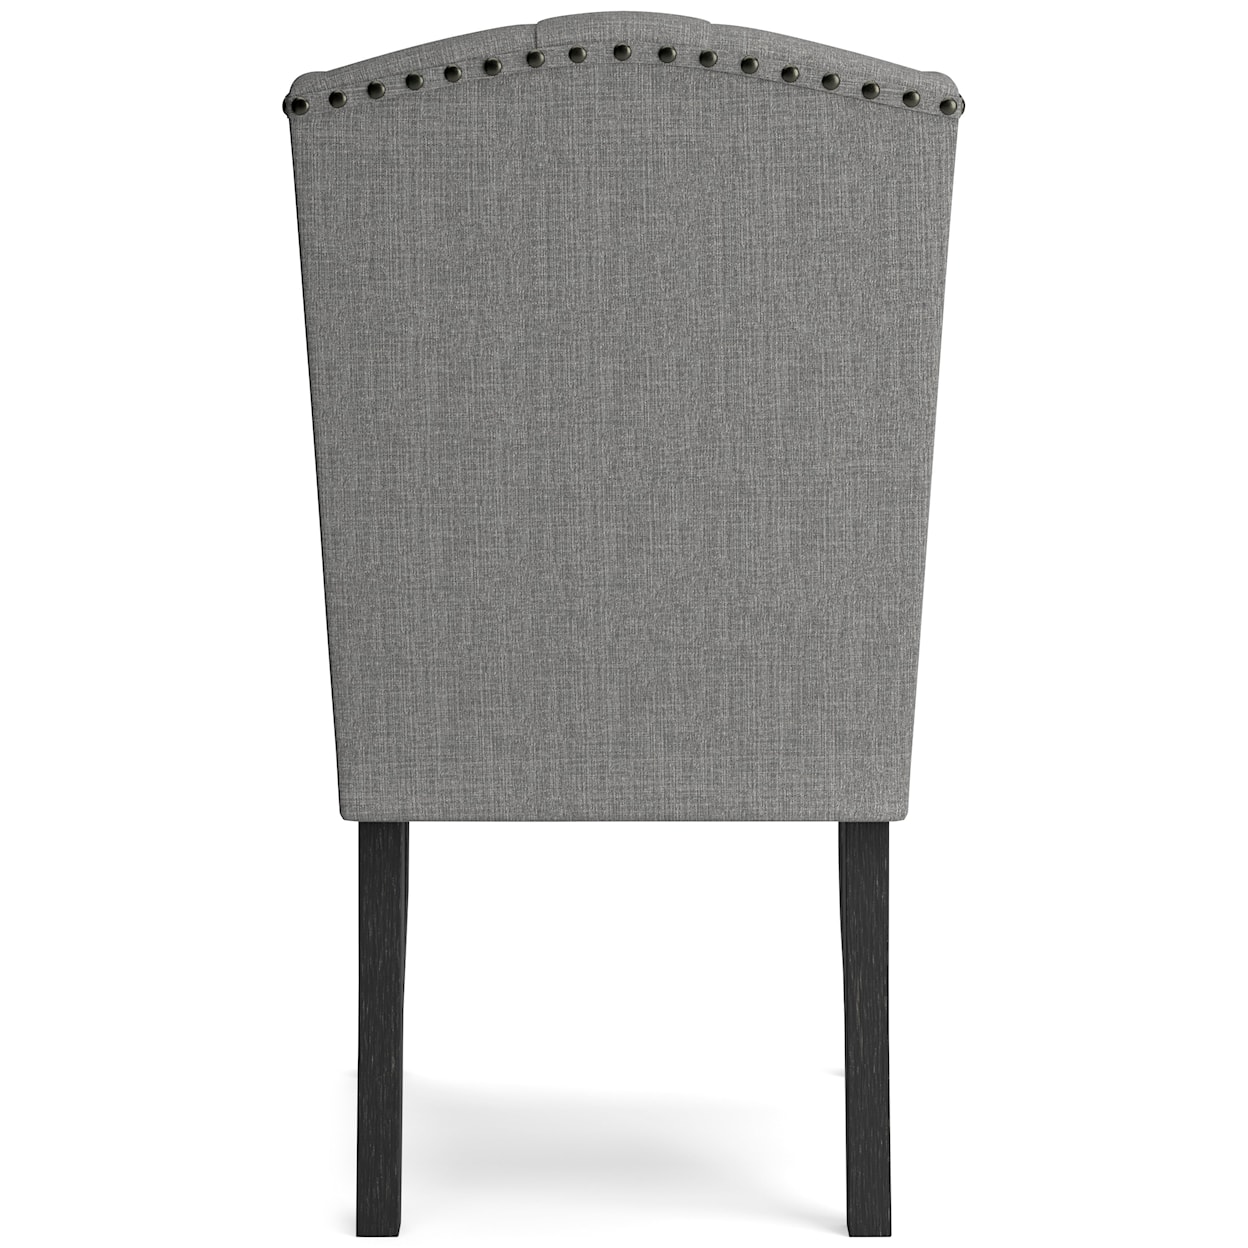 Signature Jeanette Dining Chair